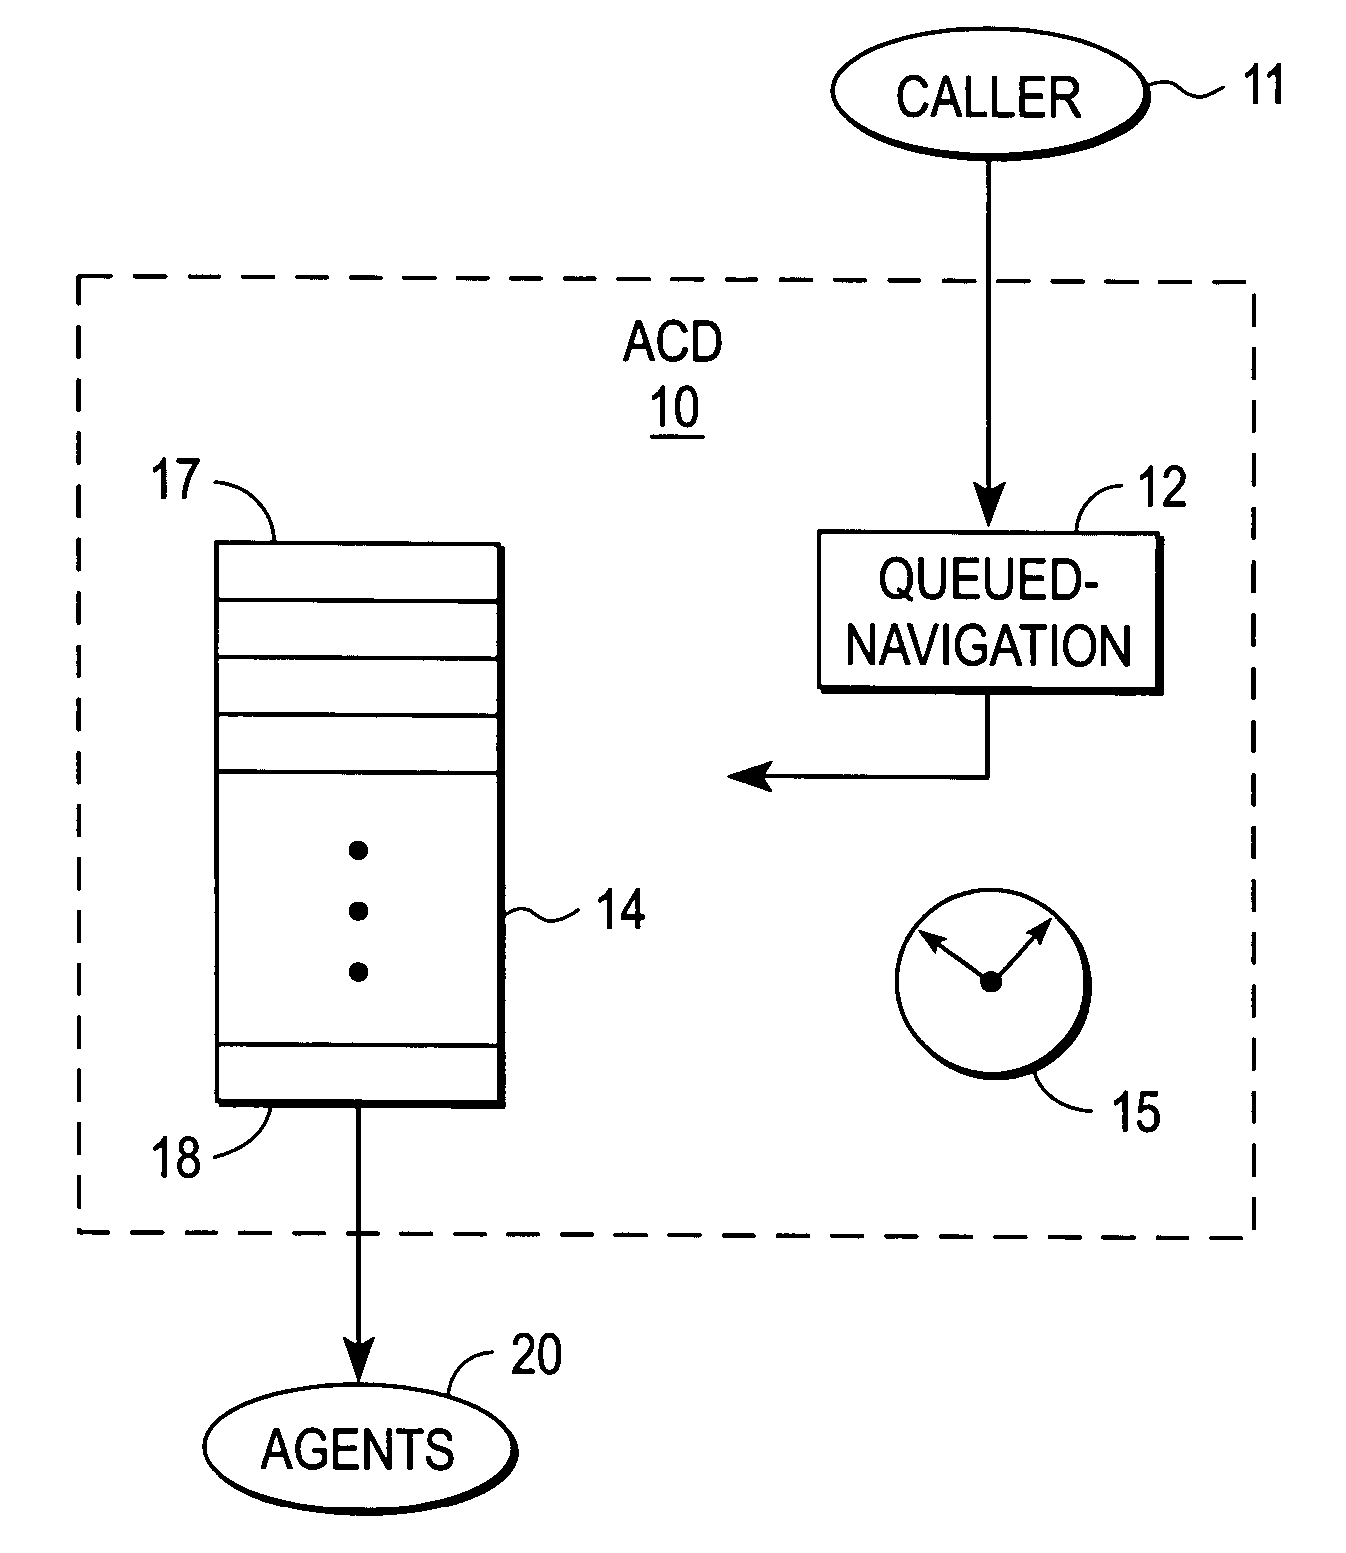 System and method for providing queue time credit for self-servicing callers